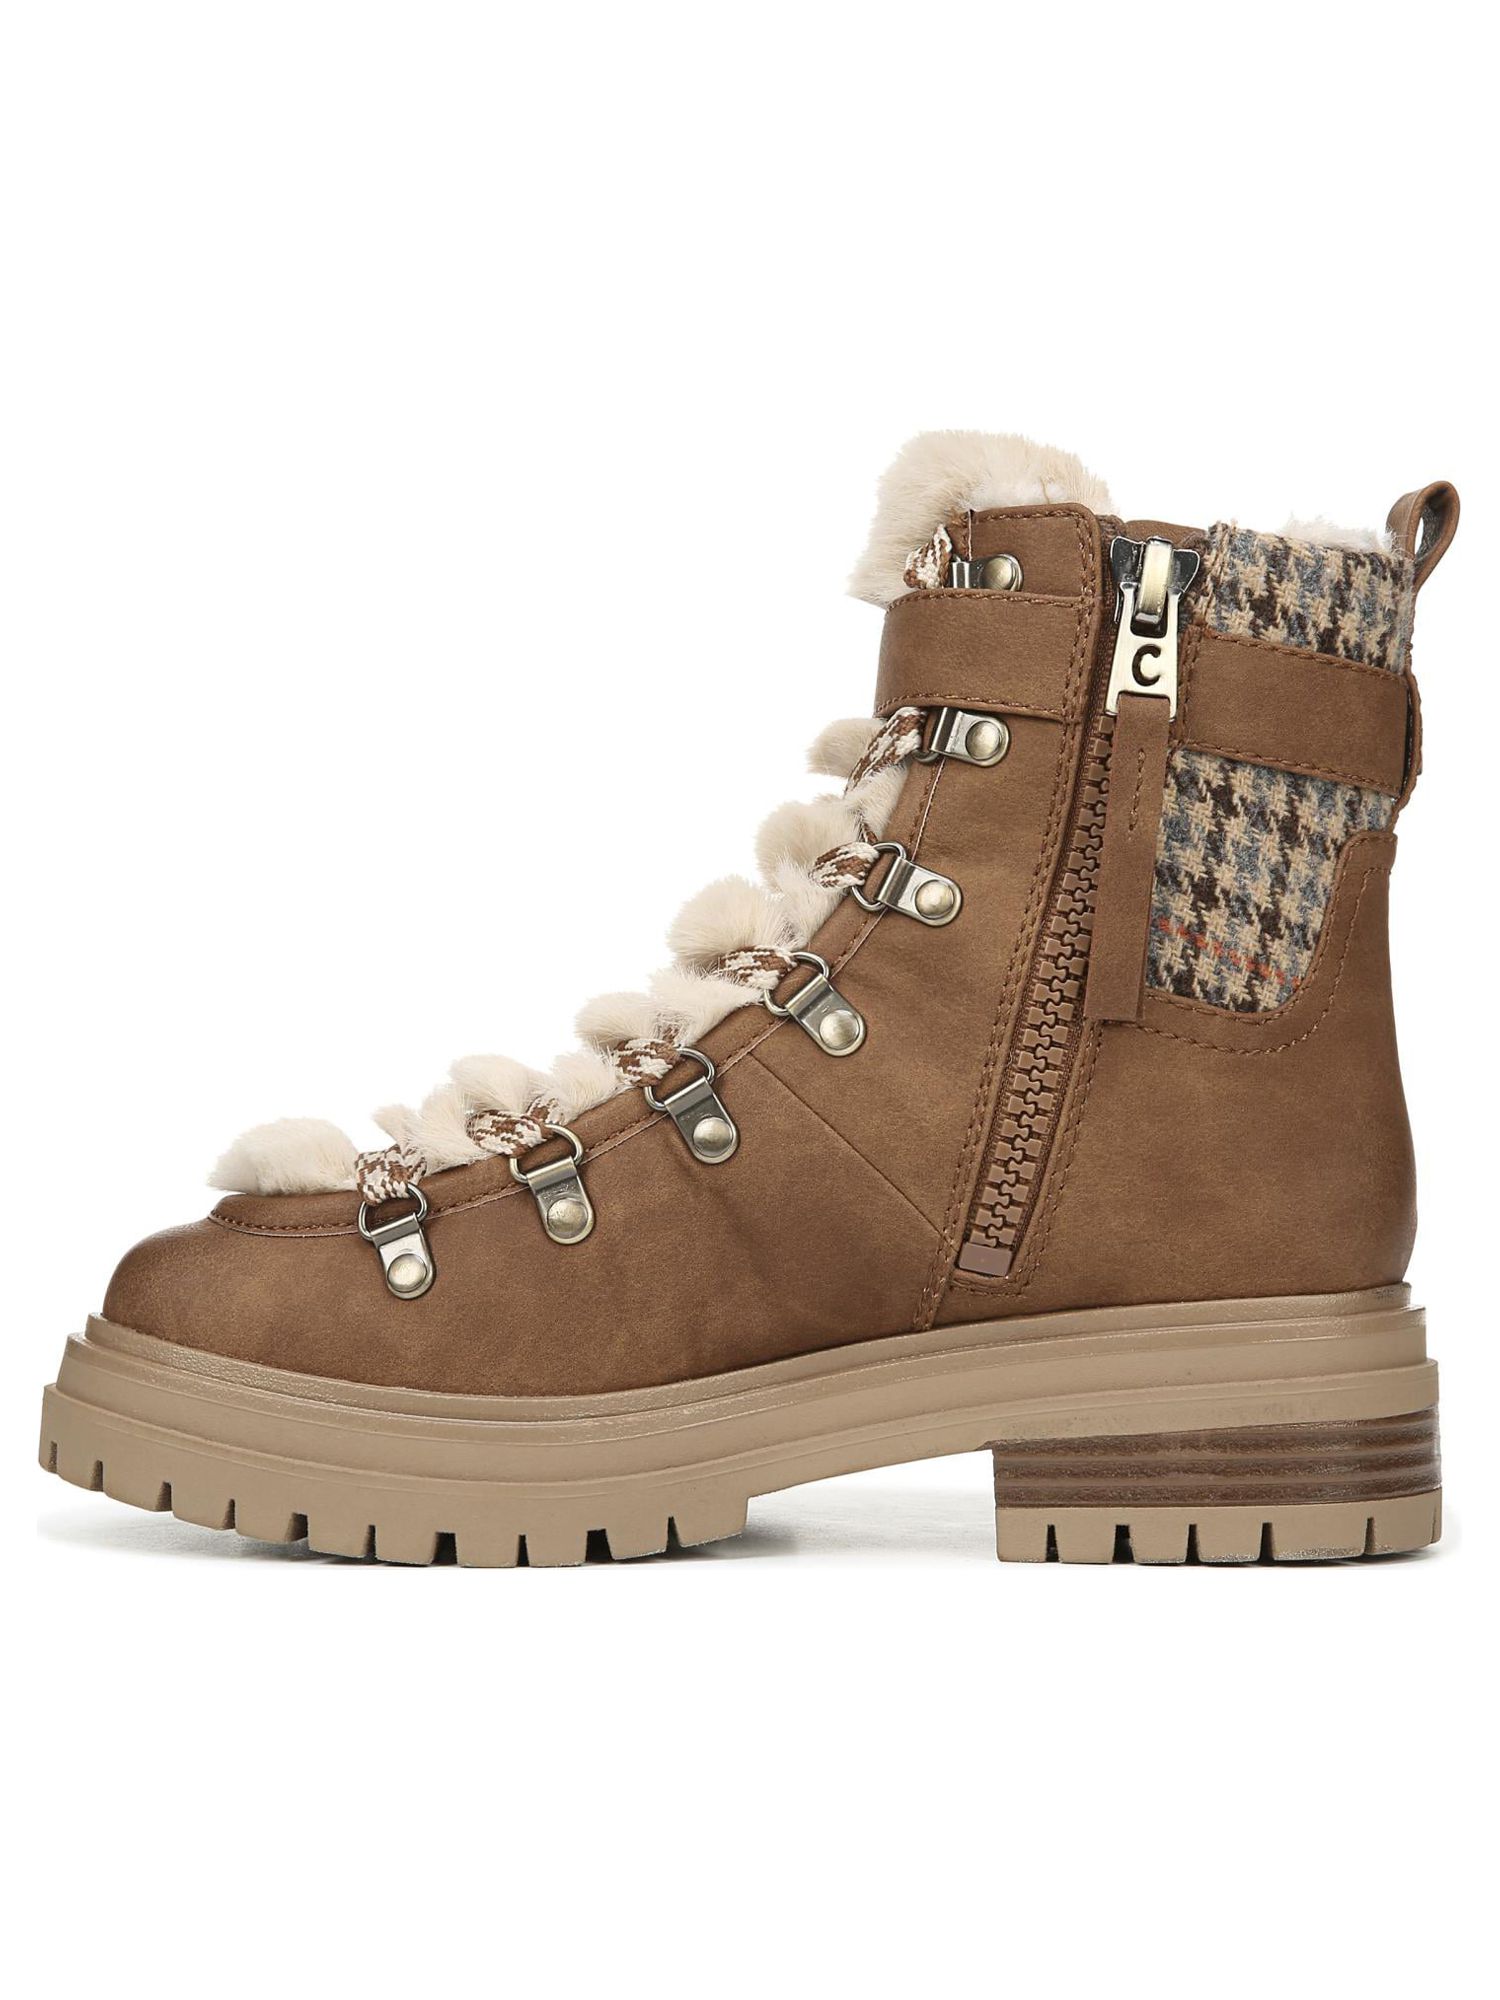 Circus by Sam Edelman Women's Gretchen Shearling Hiker Boot - image 2 of 8